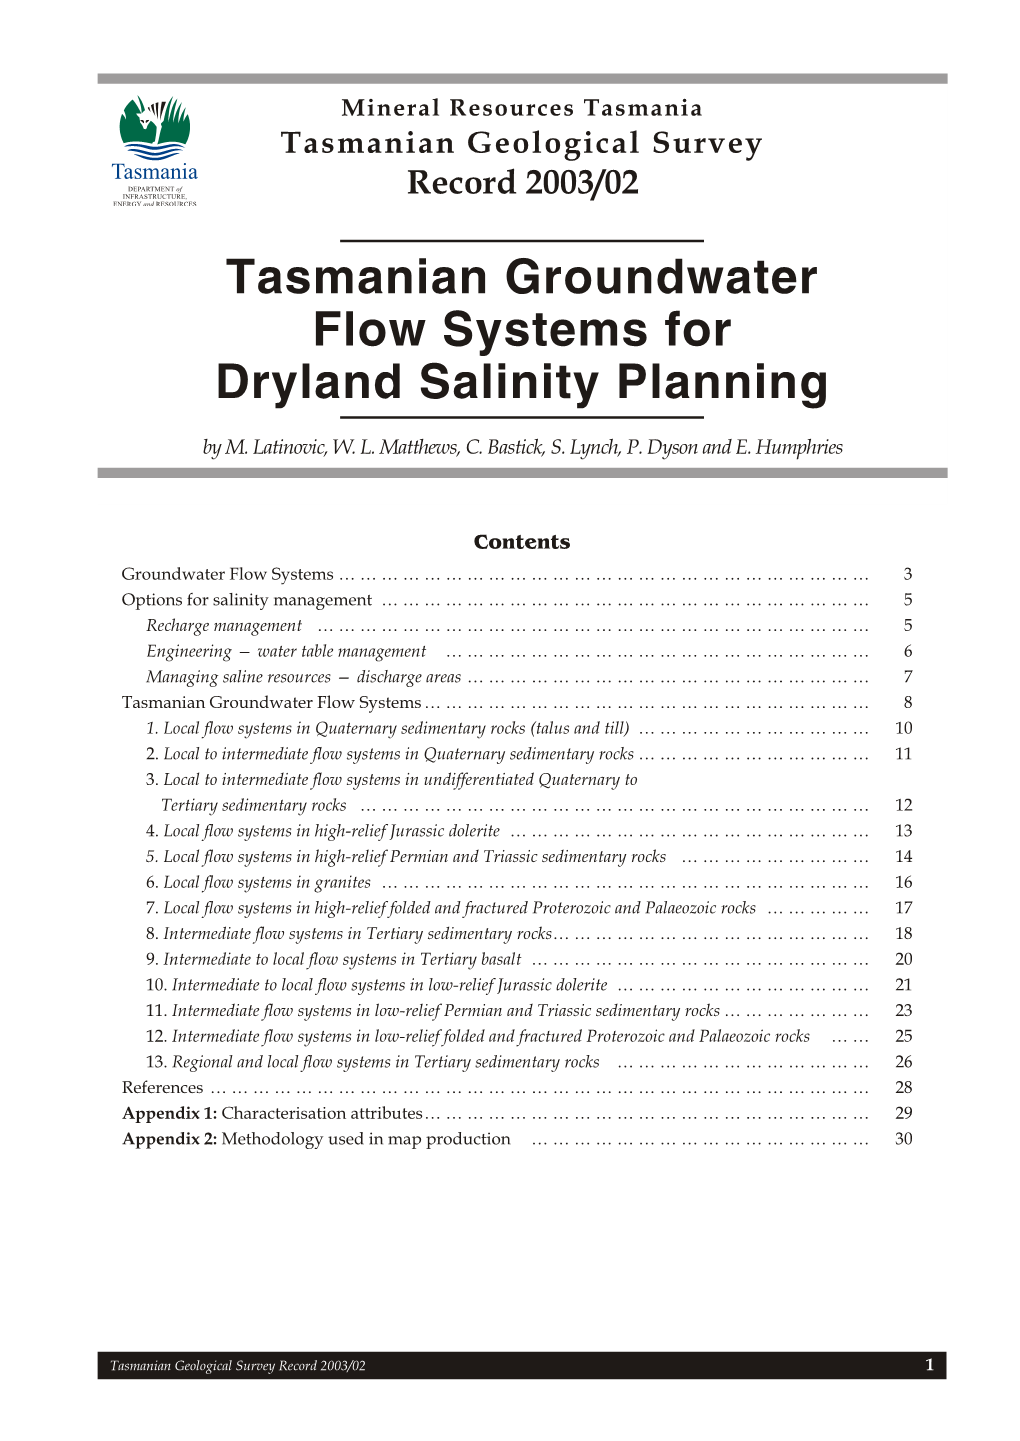 Tasmanian Groundwater Flow Systems for Dryland Salinity Planning